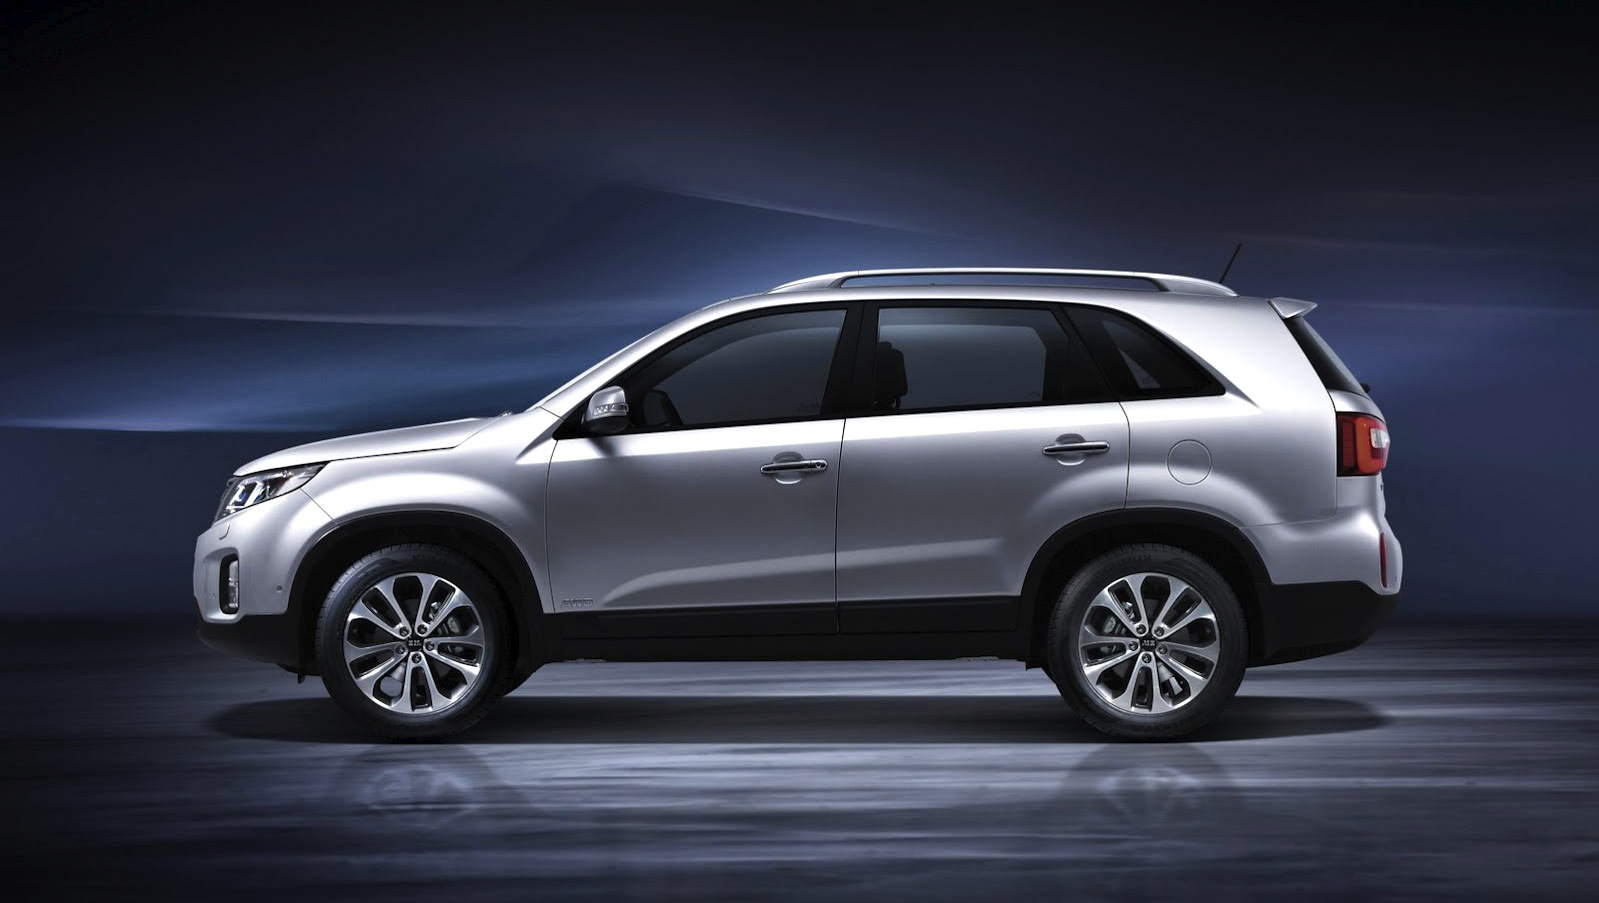 Kia Sorento set to get 2.4-litre direct-injection petrol engine in ...